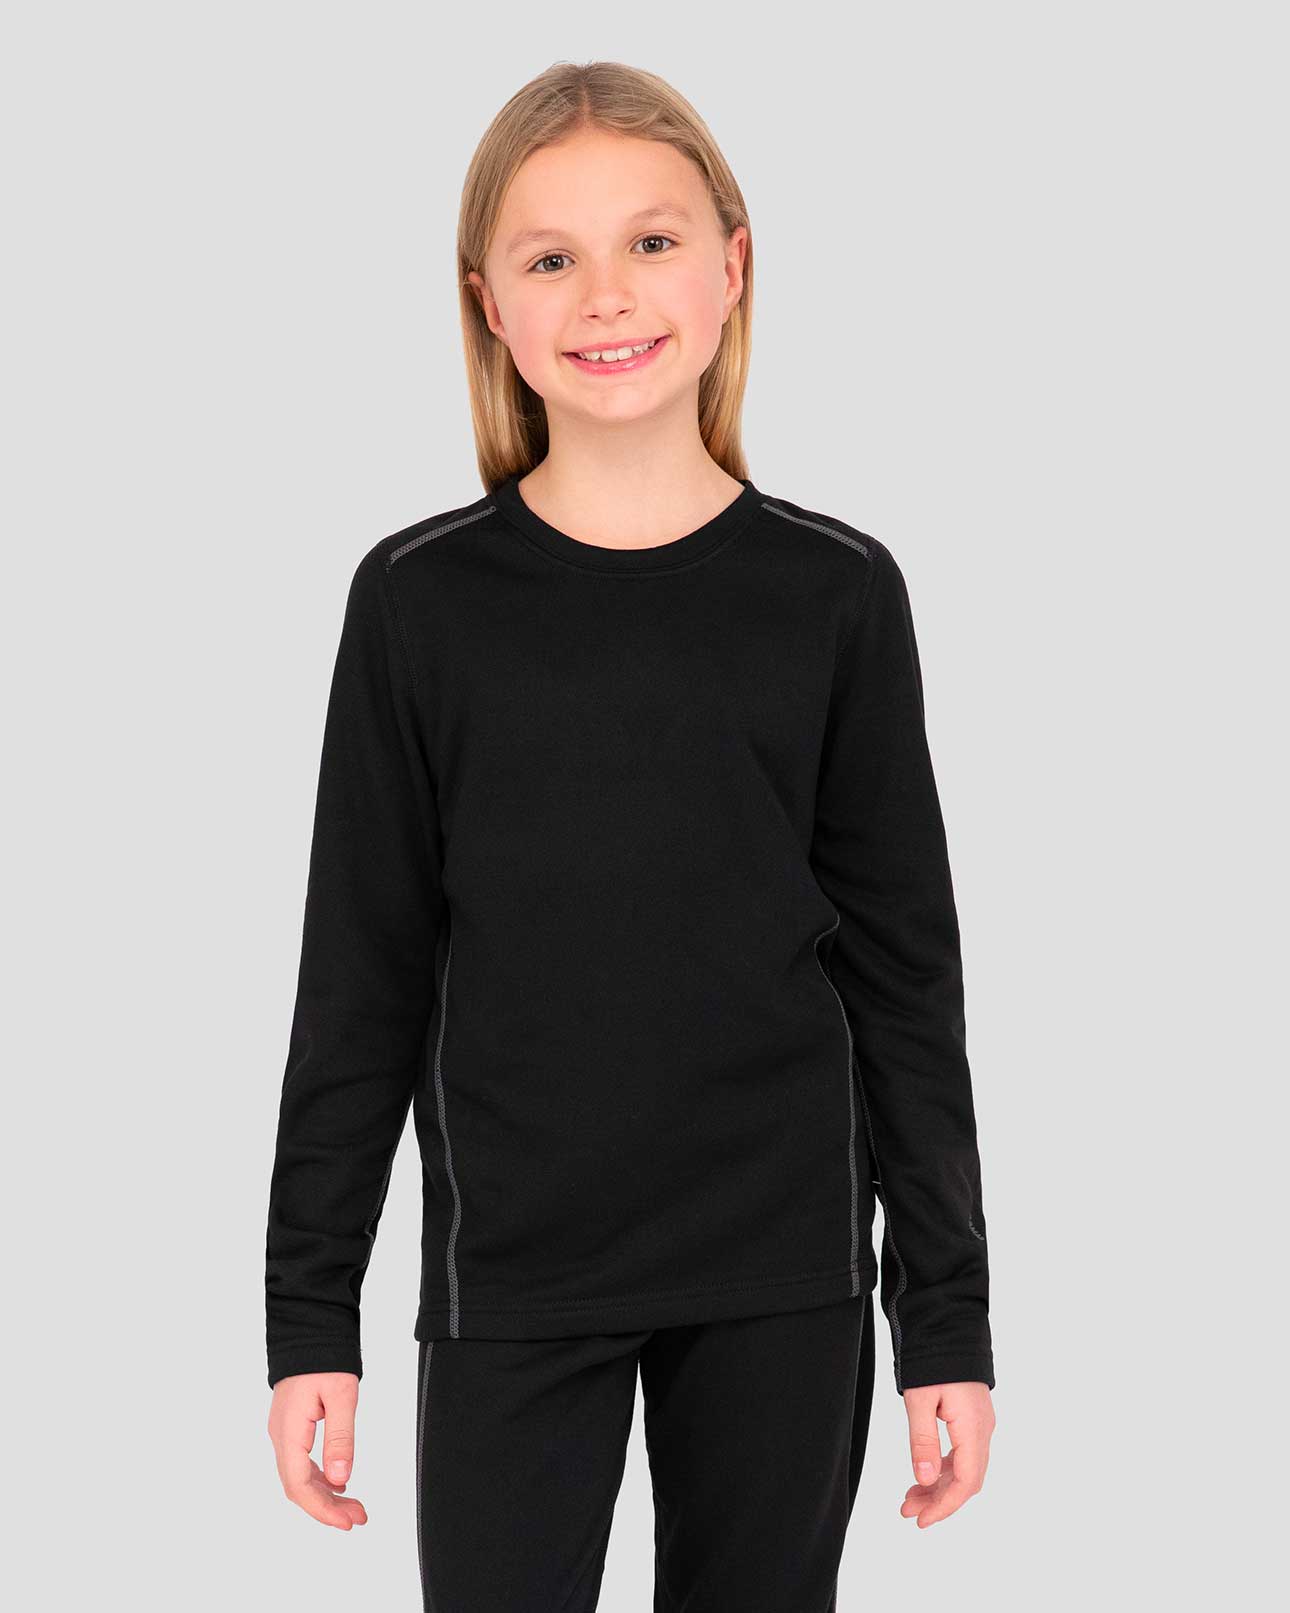 Kids' Genesis Heritage Expedition Weight Fleece Thermal Crew Shirt | Color: Onyx